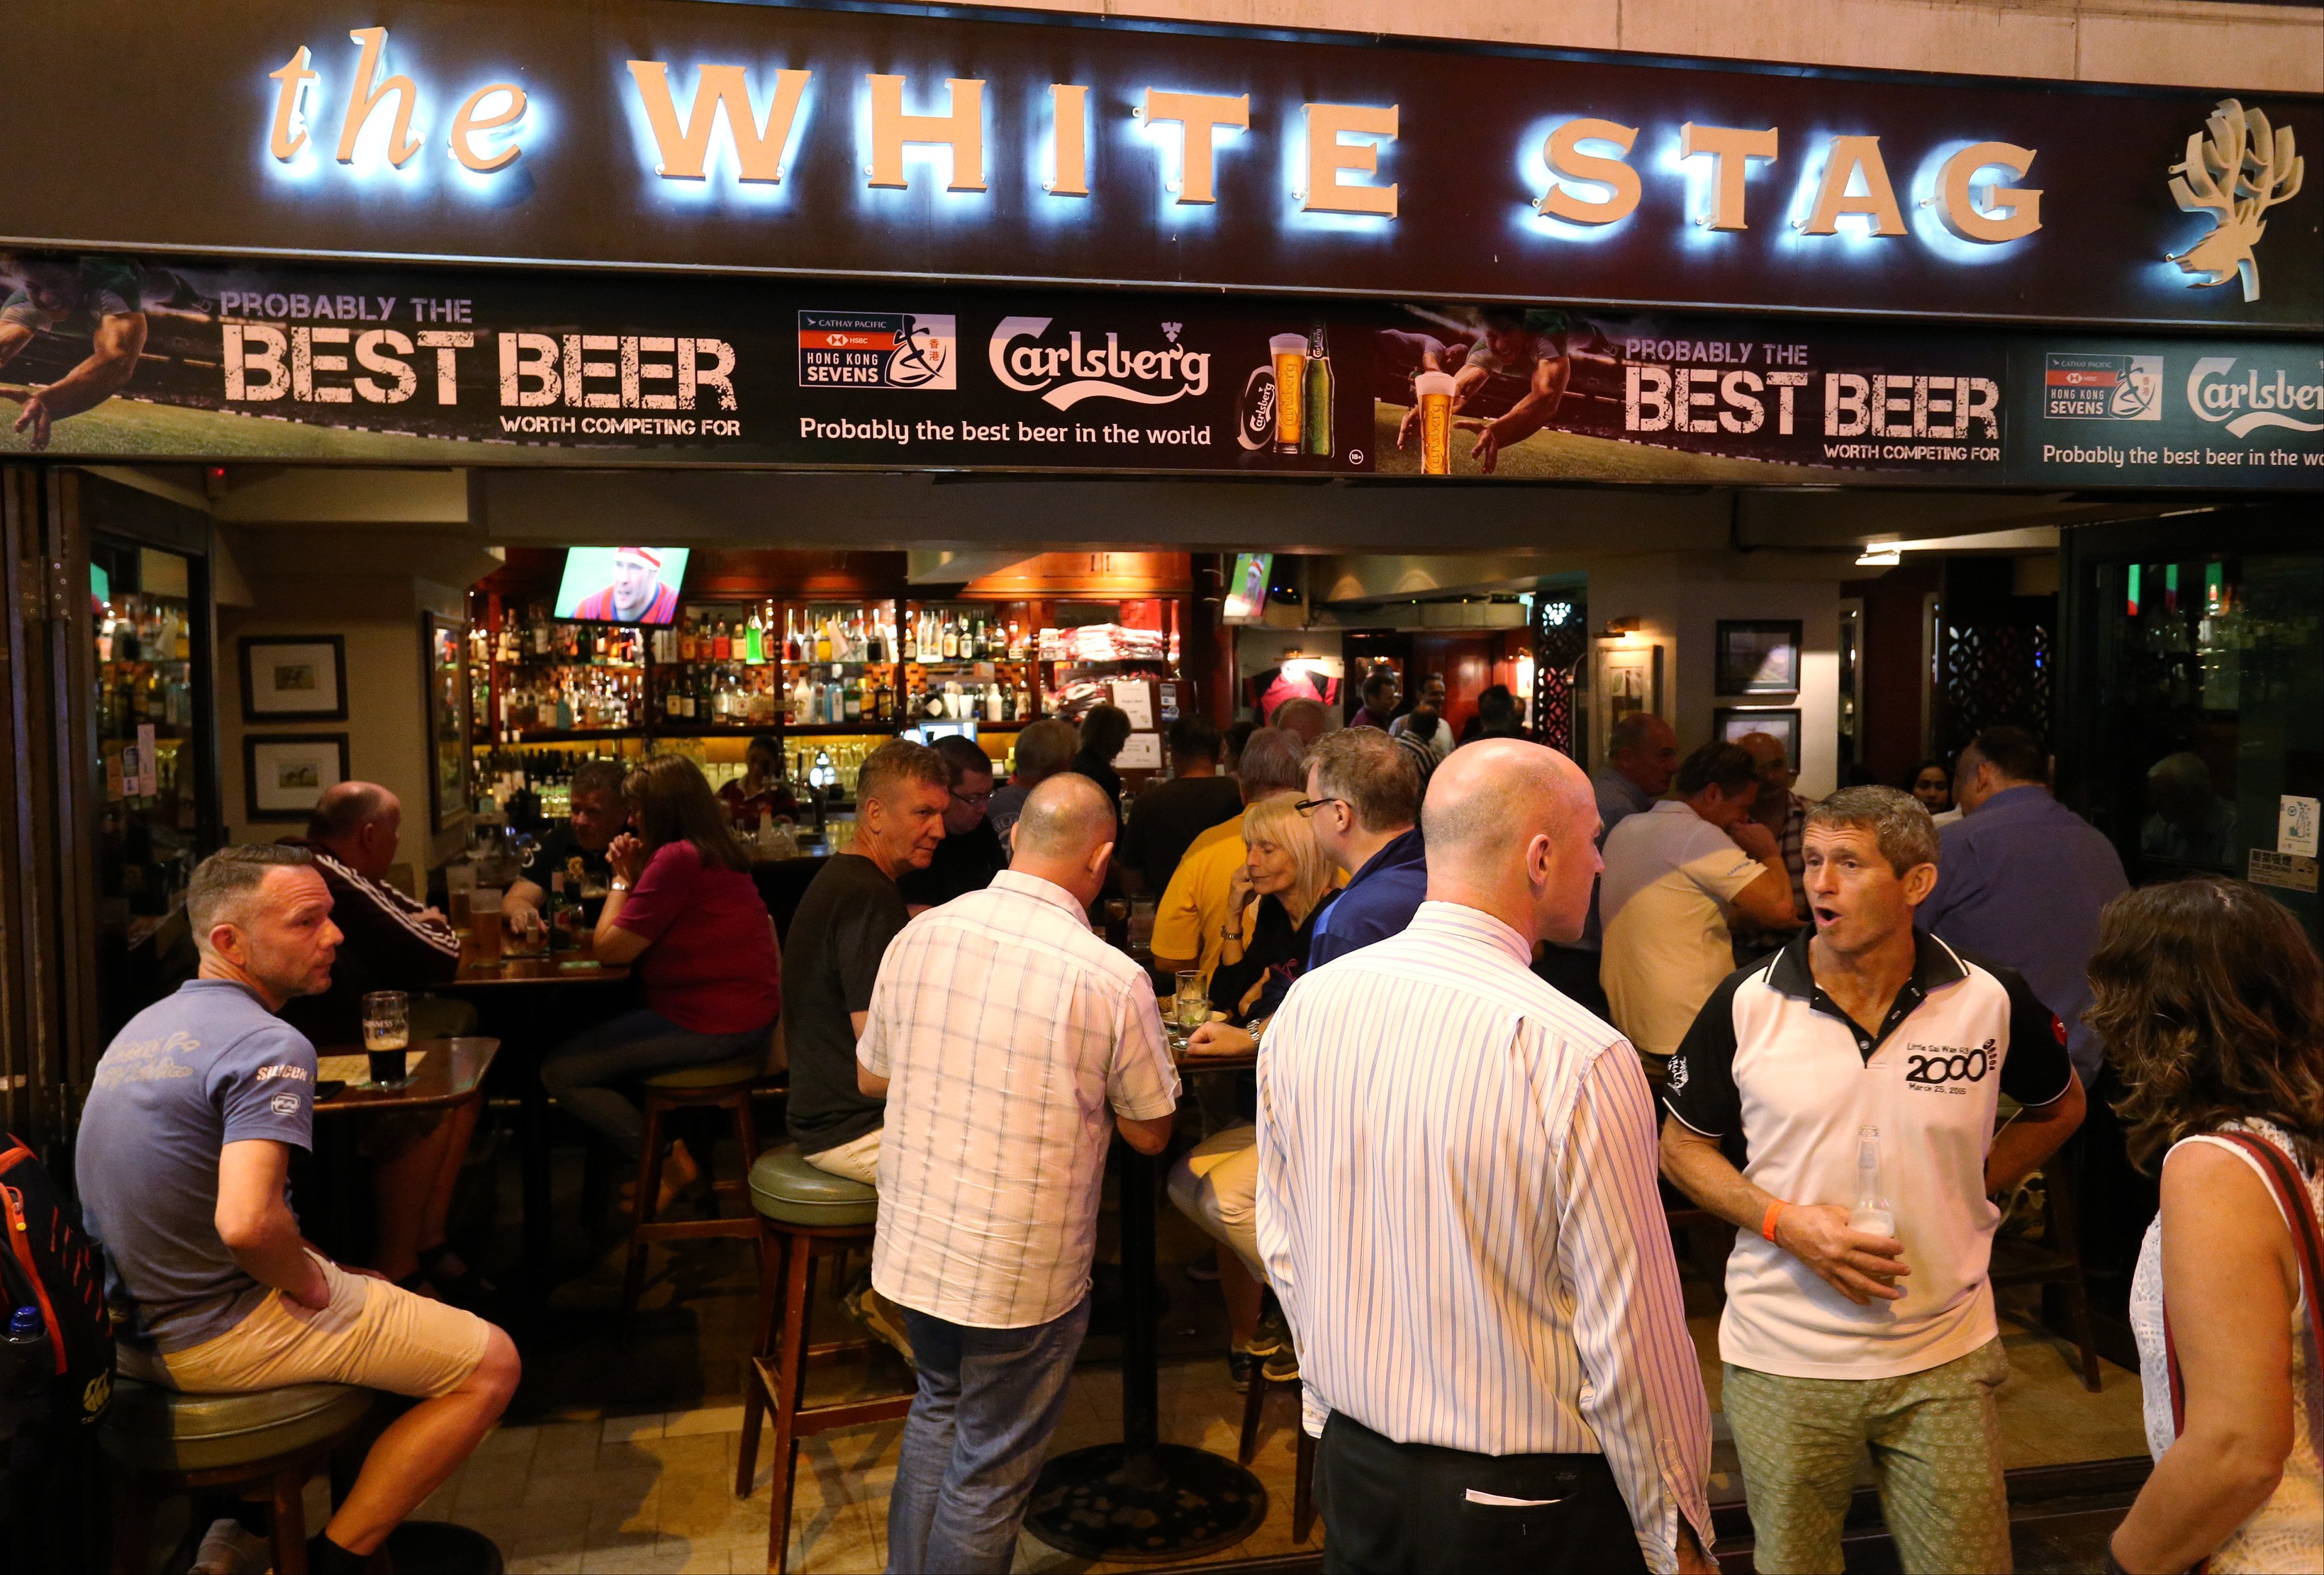 People at The White Stag bar in Wan Chai during the Hong Kong Sevens rugby tournament in 2018. Photo: Dickson Lee